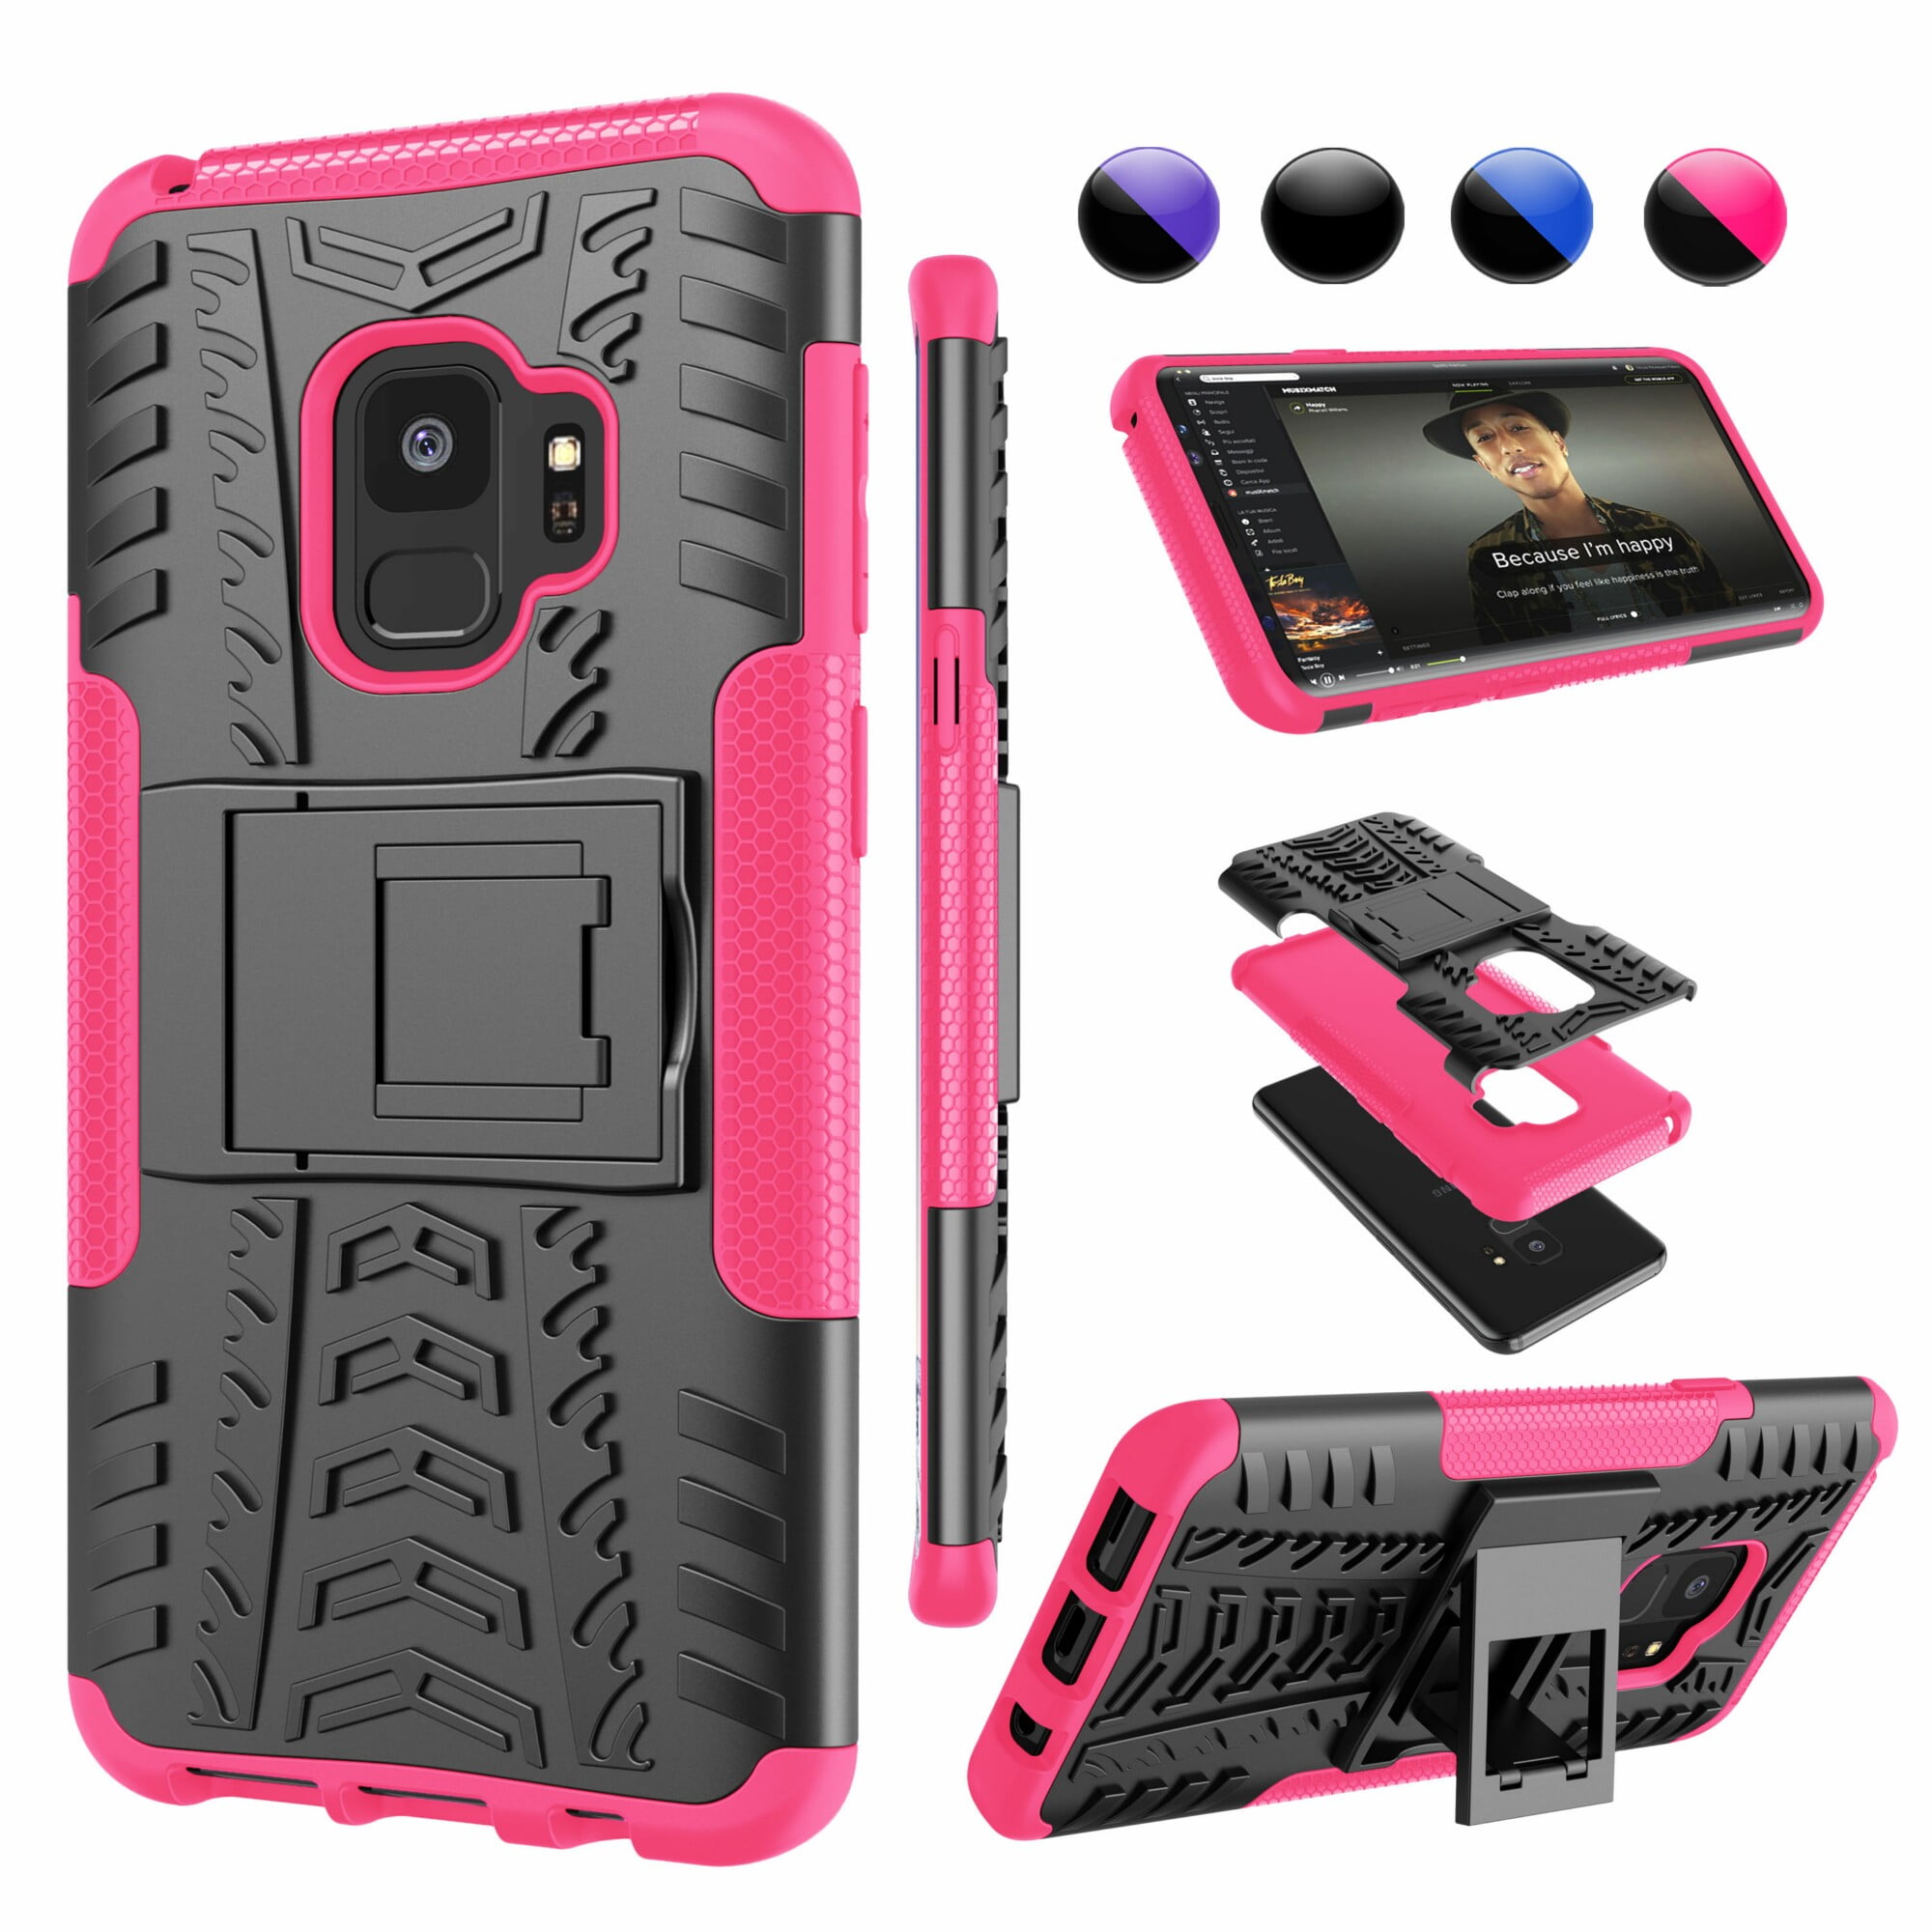 Samsung S9 Cover, Galaxy S9 with Stand, Galaxy S9 Cover, SM-G960 Cover, Njjex Hybrid [Kickstand][Non-slip] Full-body Rugged ShockProof Protection Case For Samsung Galaxy S9 -Hot Pink - Walmart.com